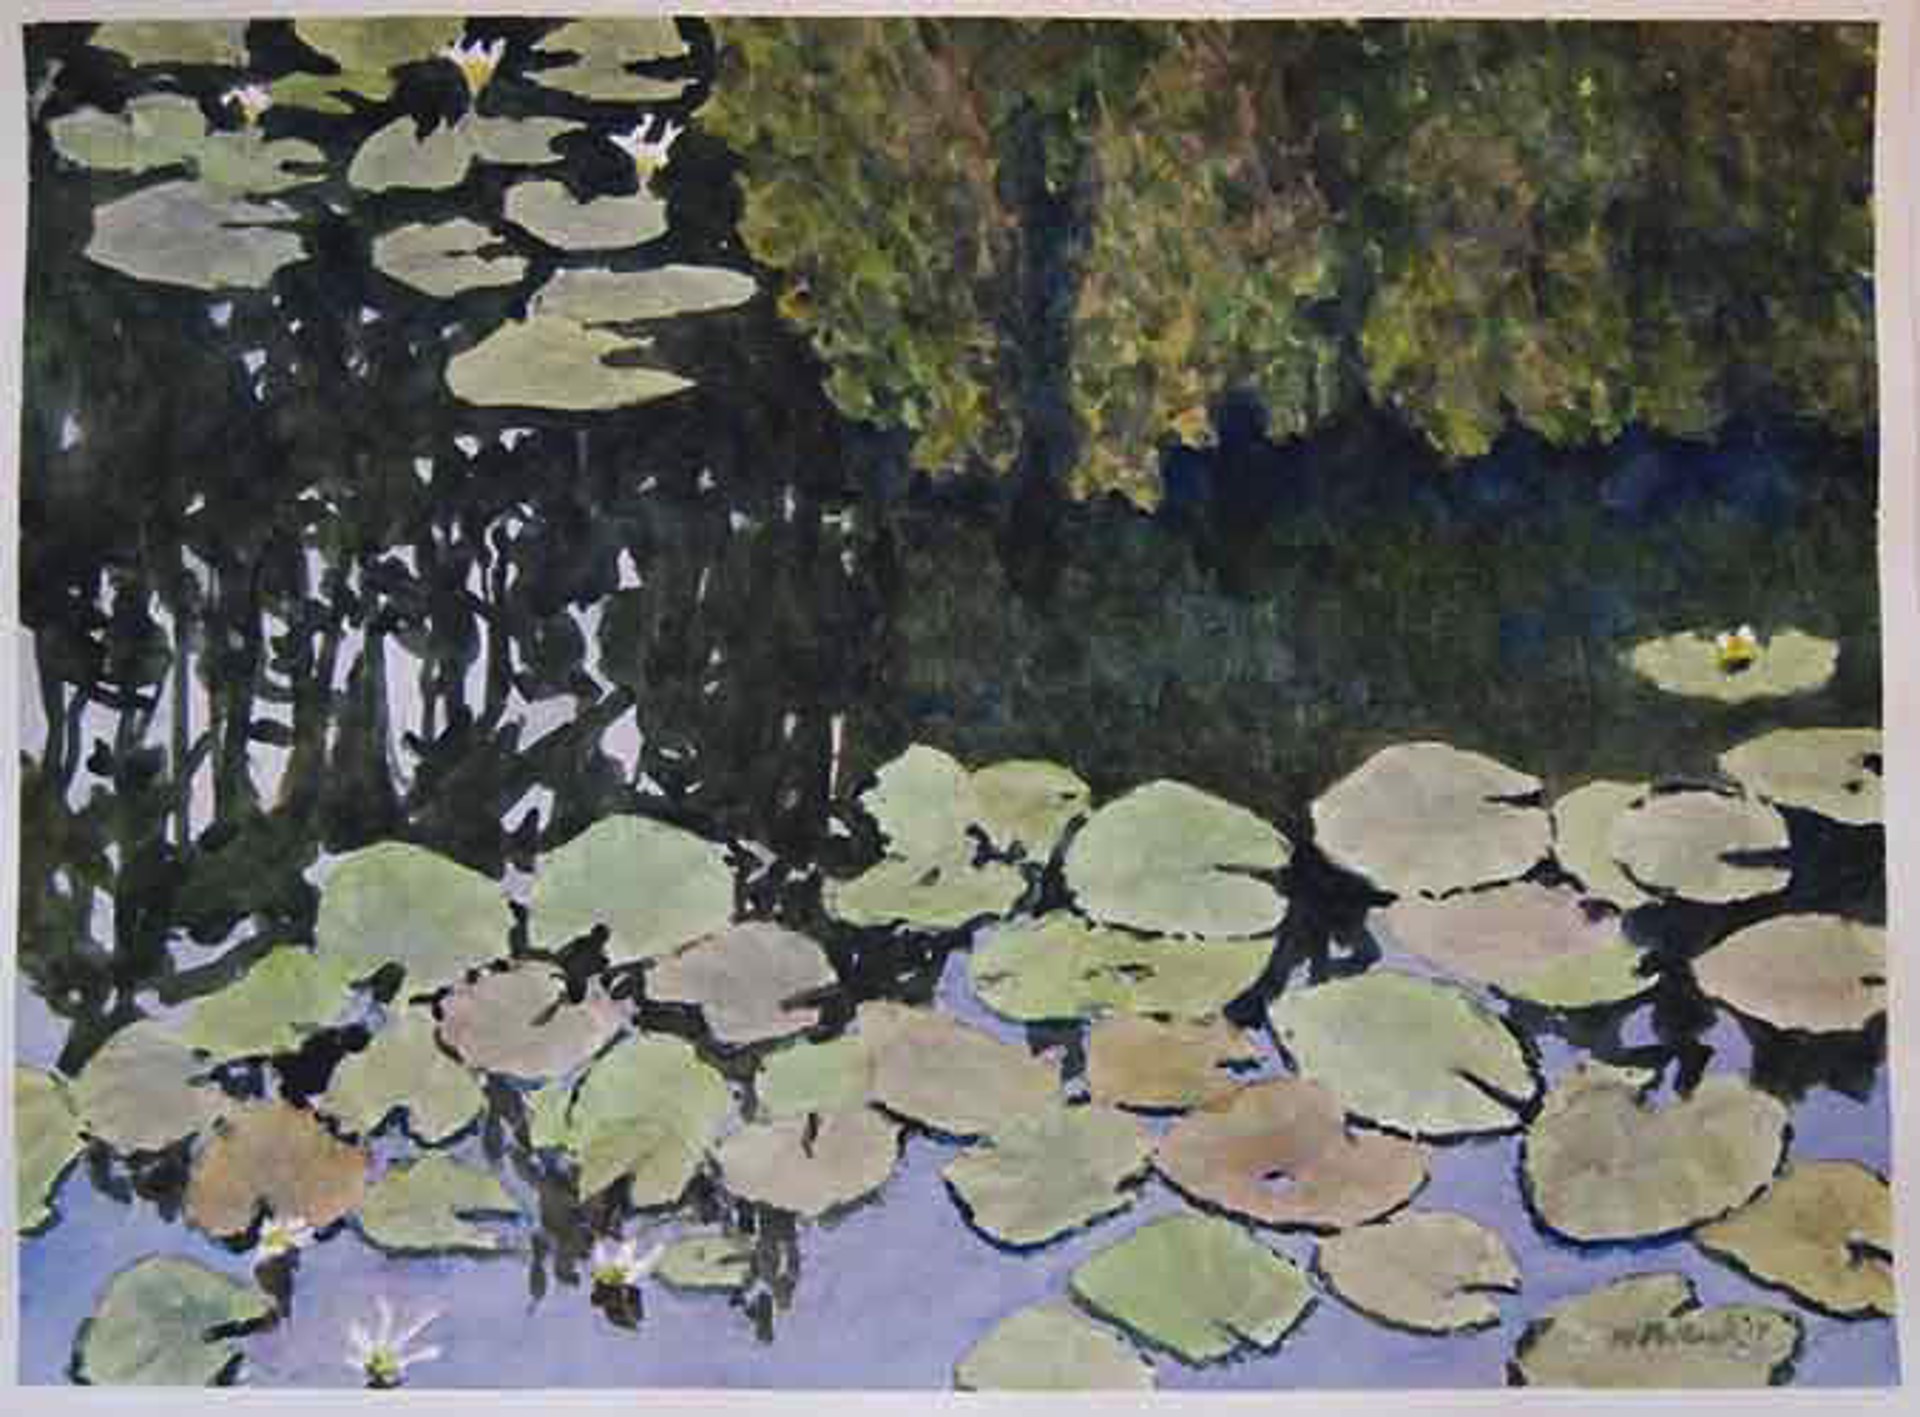 Water Lilies 2 by Wilson Pollock